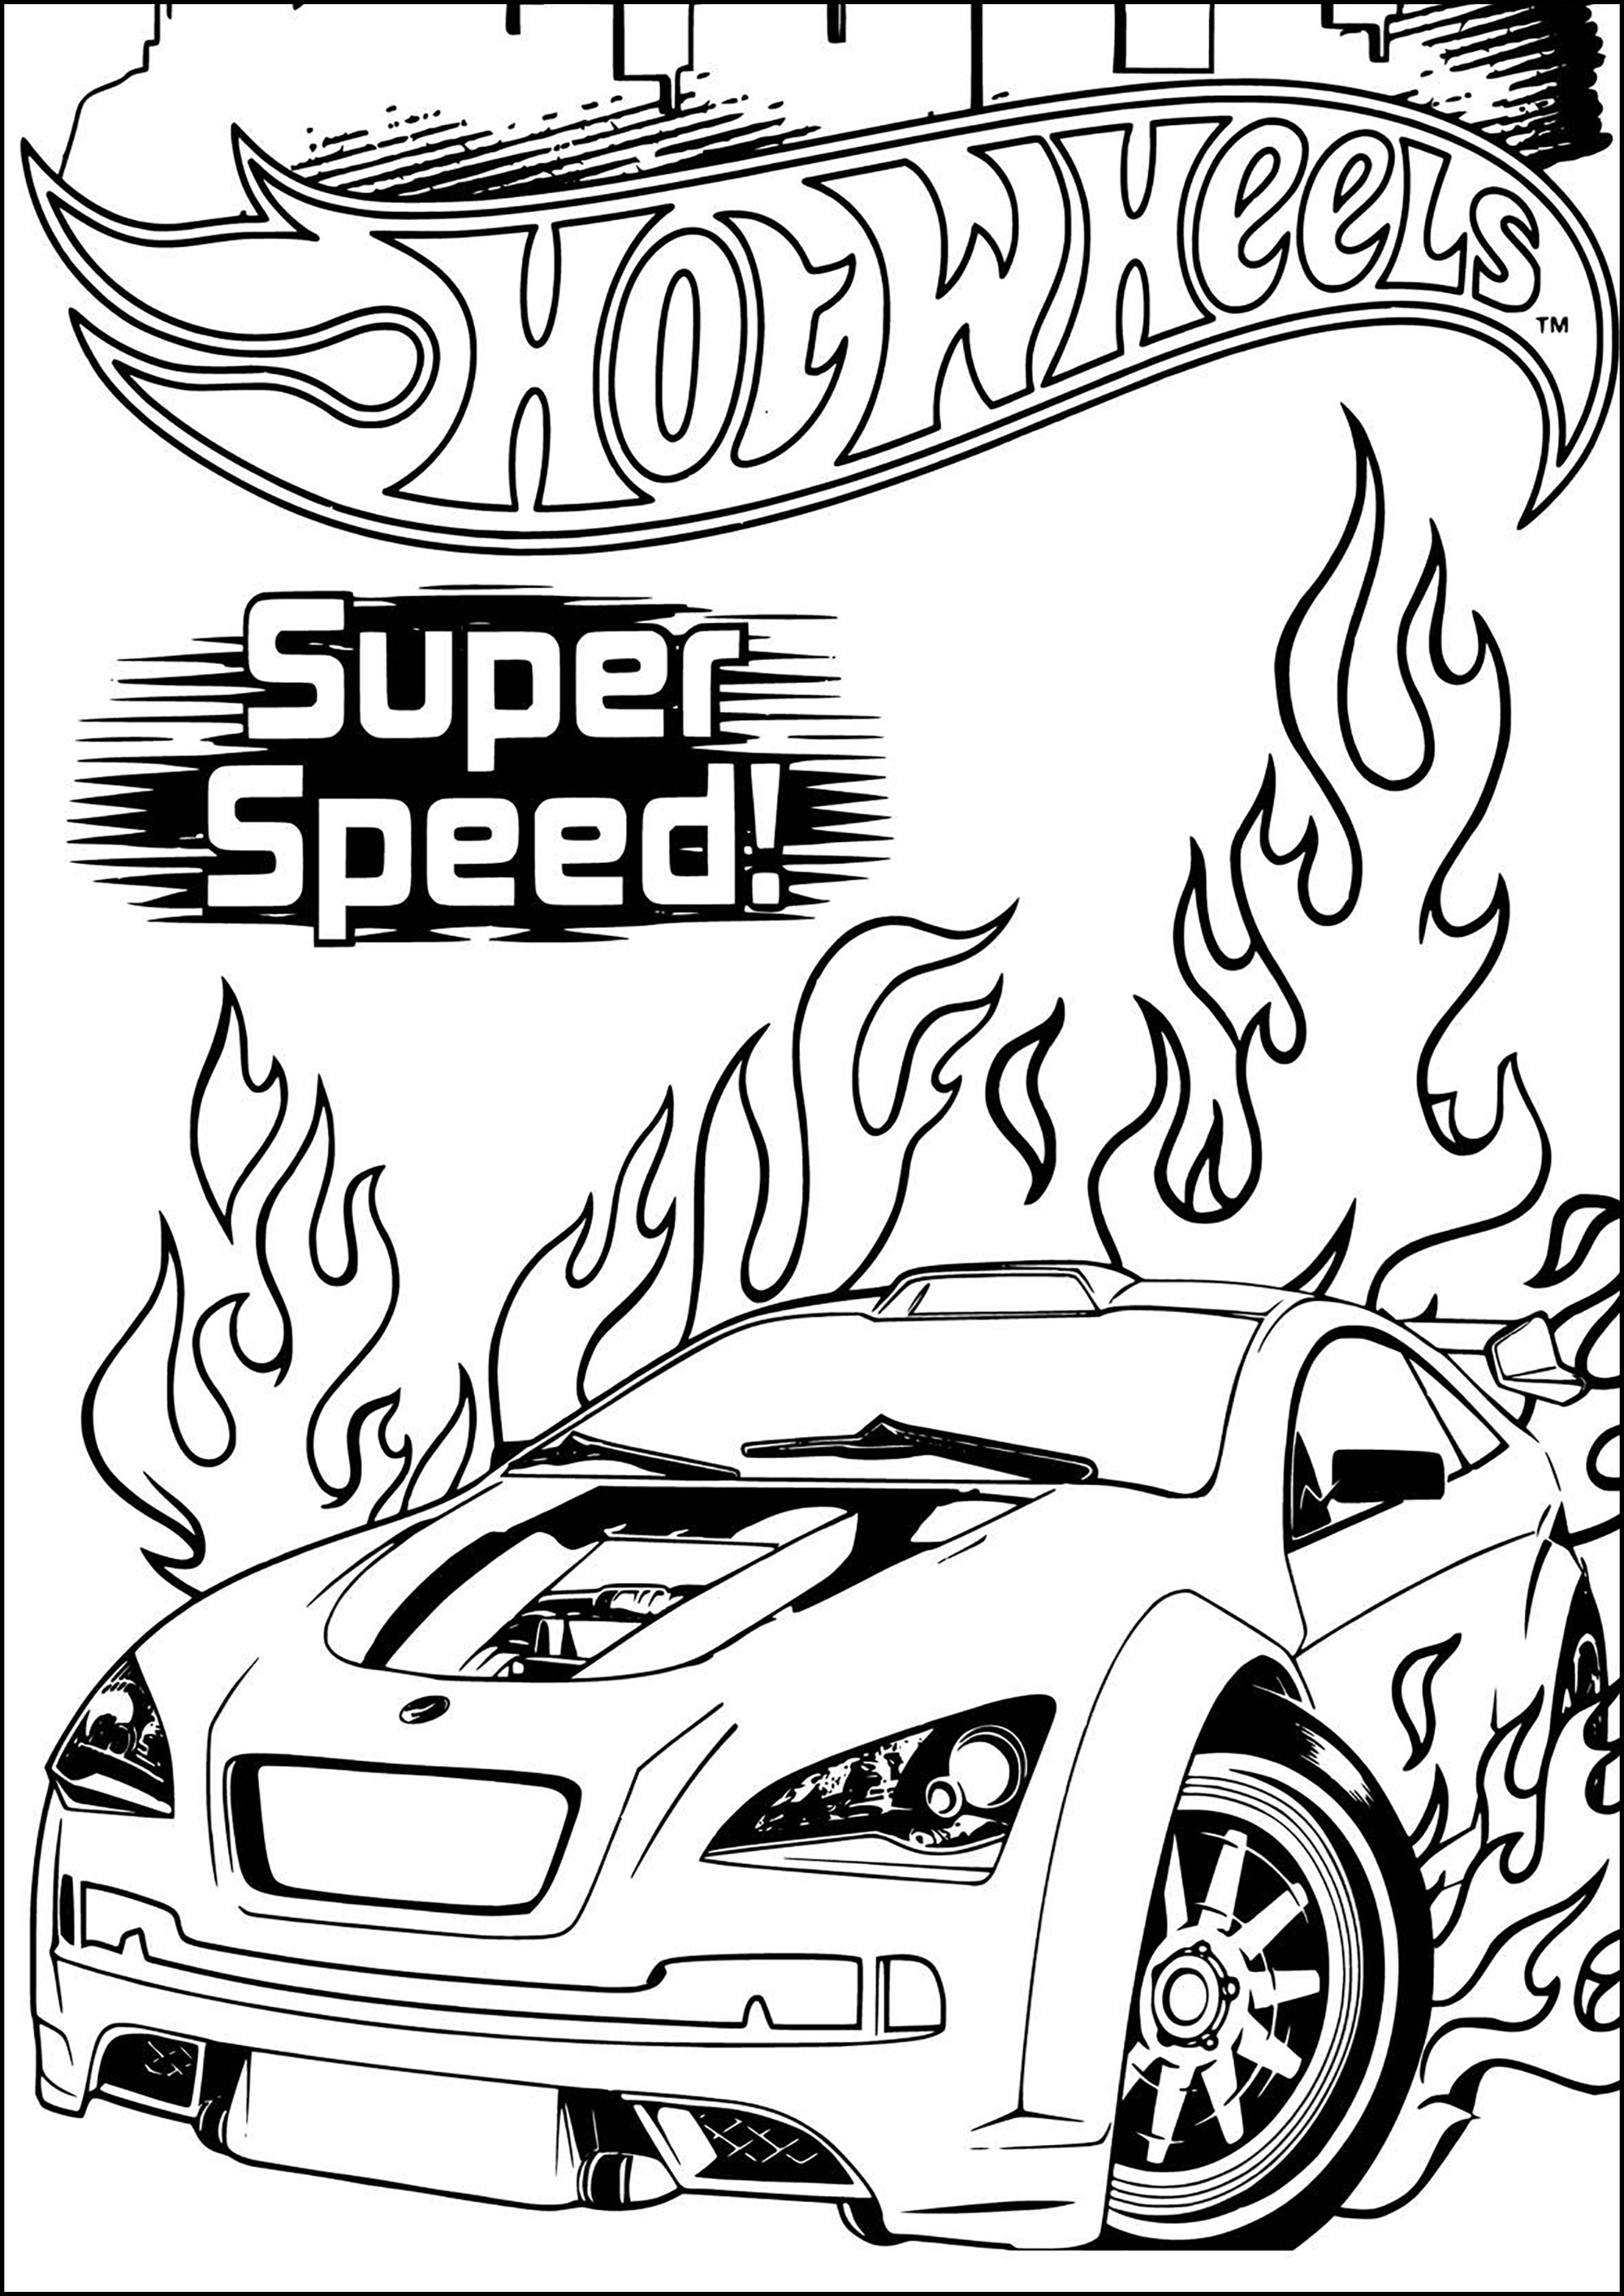 Funny free Hot Wheels coloring page to print and color